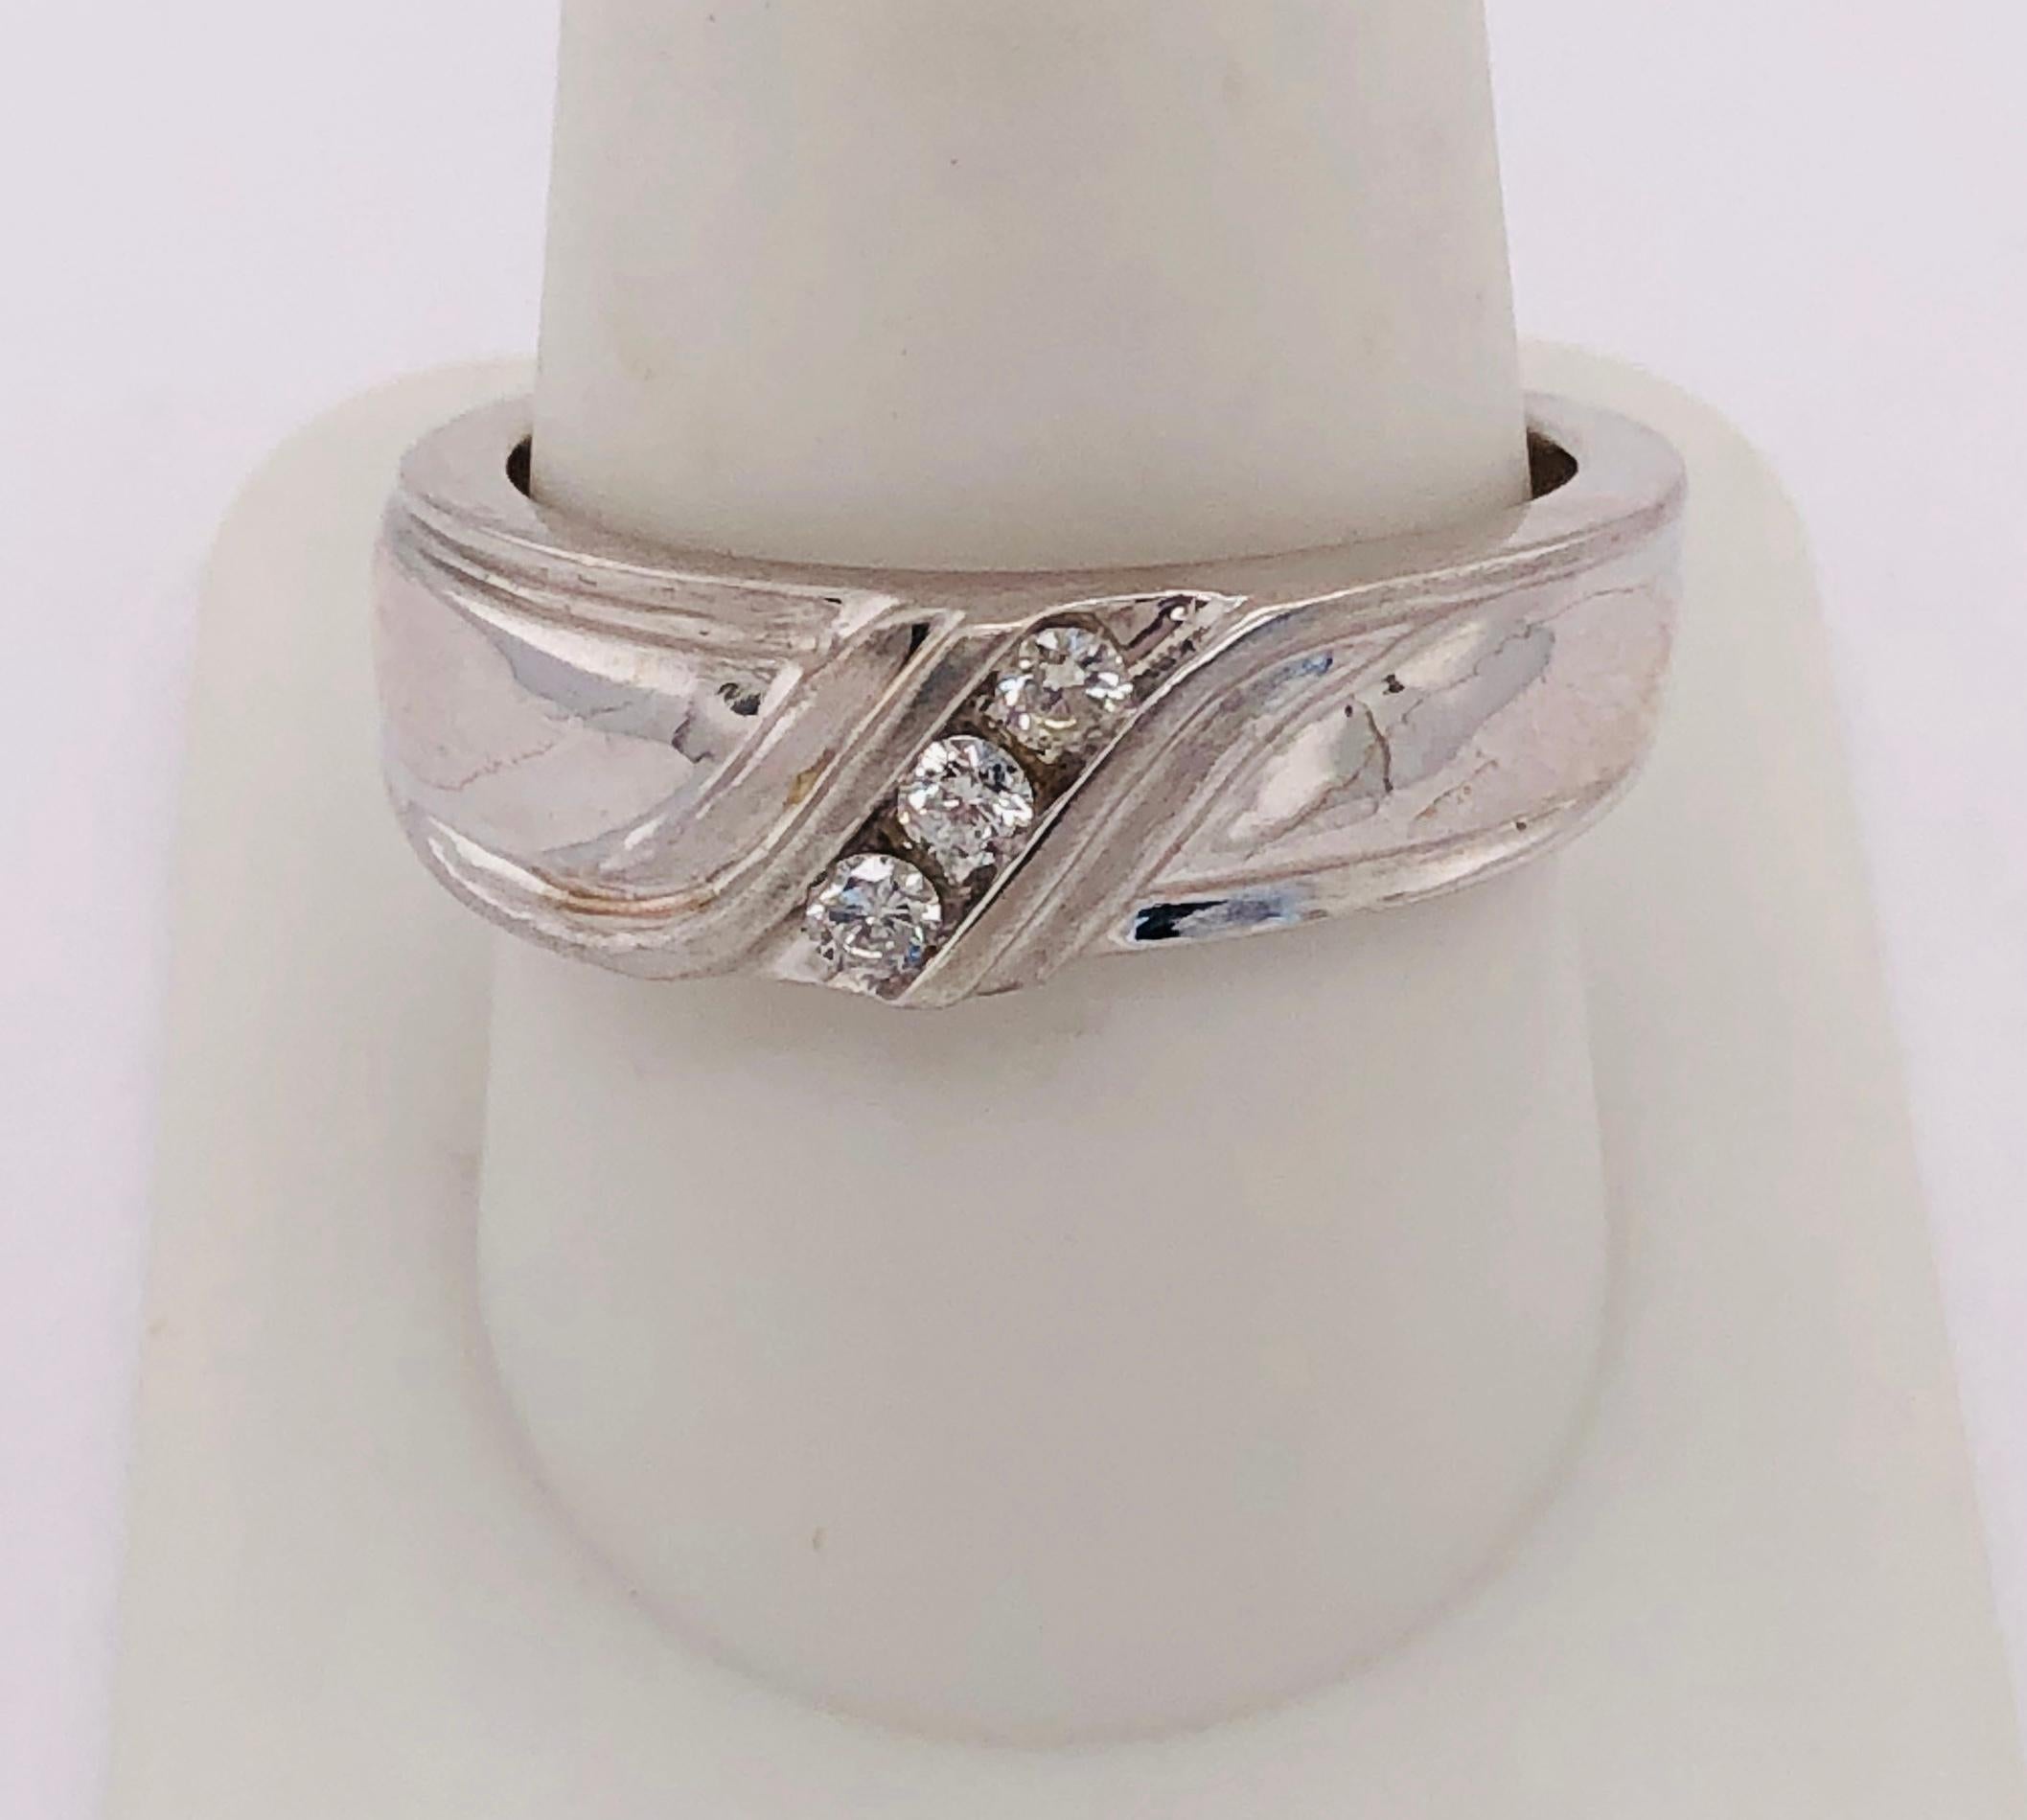 14Kt White Gold Three Diamond Ring .25 Total Diamond Weight
Size 10.25  7.95grams total weight.